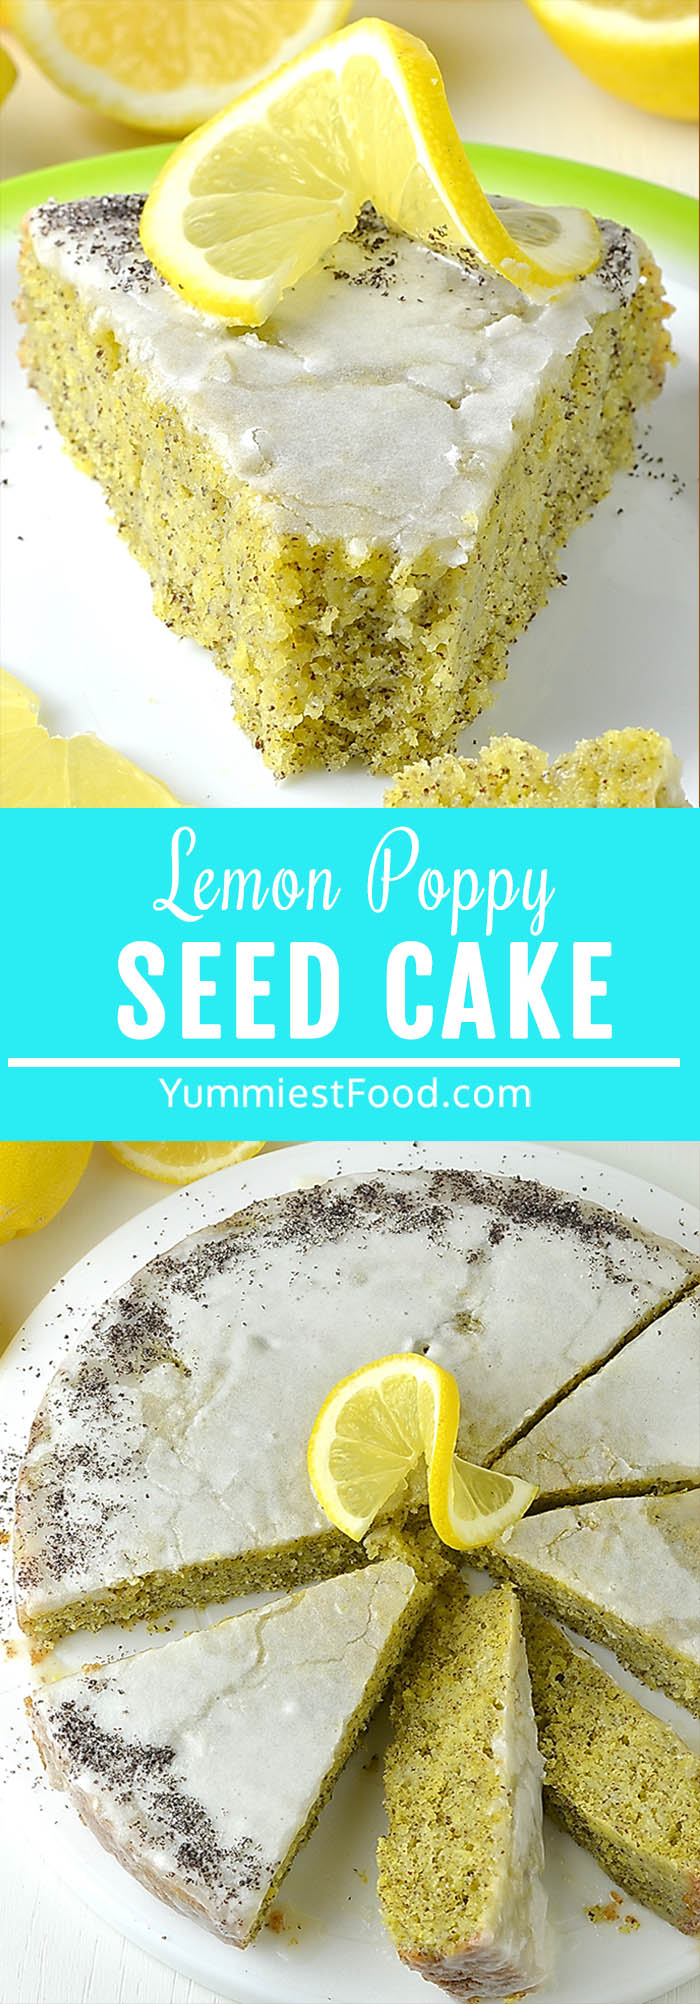 This Lemon Poppy Seed Cake is a tender, moist cake that’s full of lemon flavor and poppy seeds! It’s covered in a light lemon icing for a cake that’s perfect for lemon lovers! A delicious cake that is bursting with summer flavor, the most tasty and yummy dessert